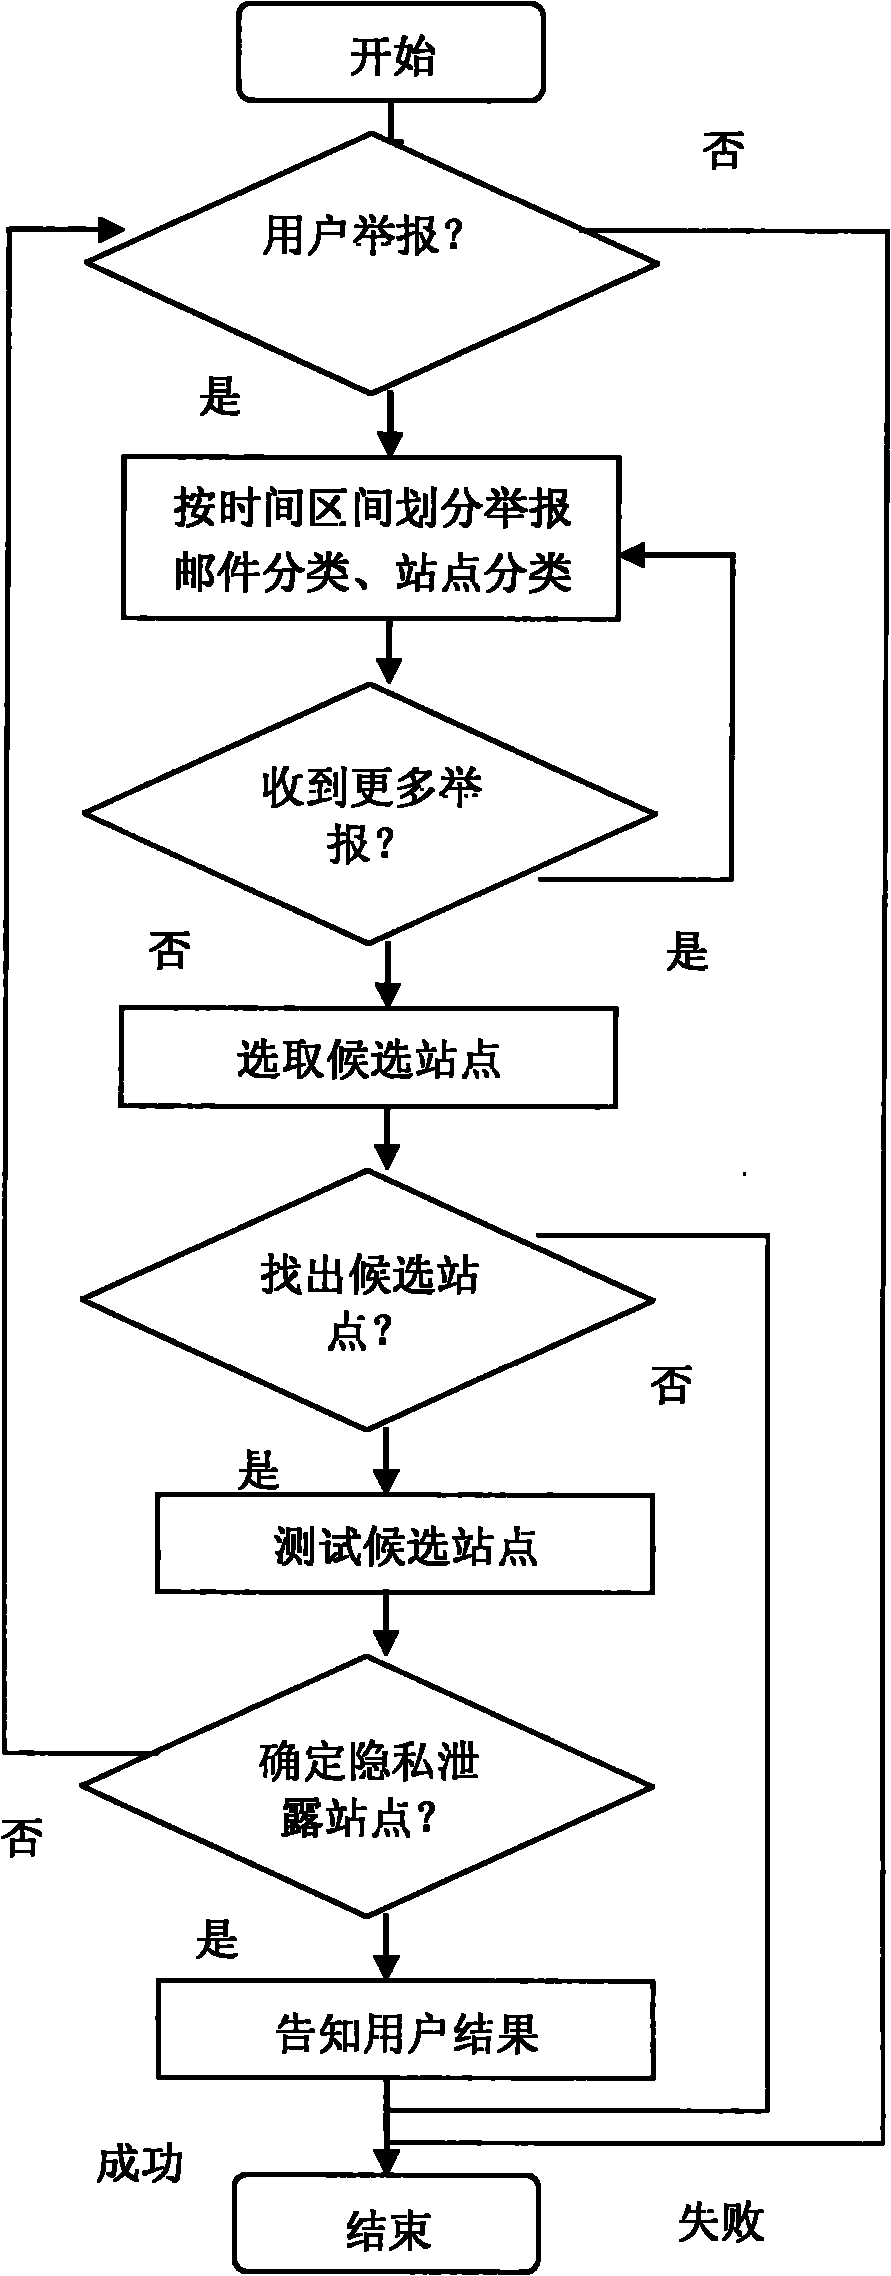 Method for tracking leakage of private information